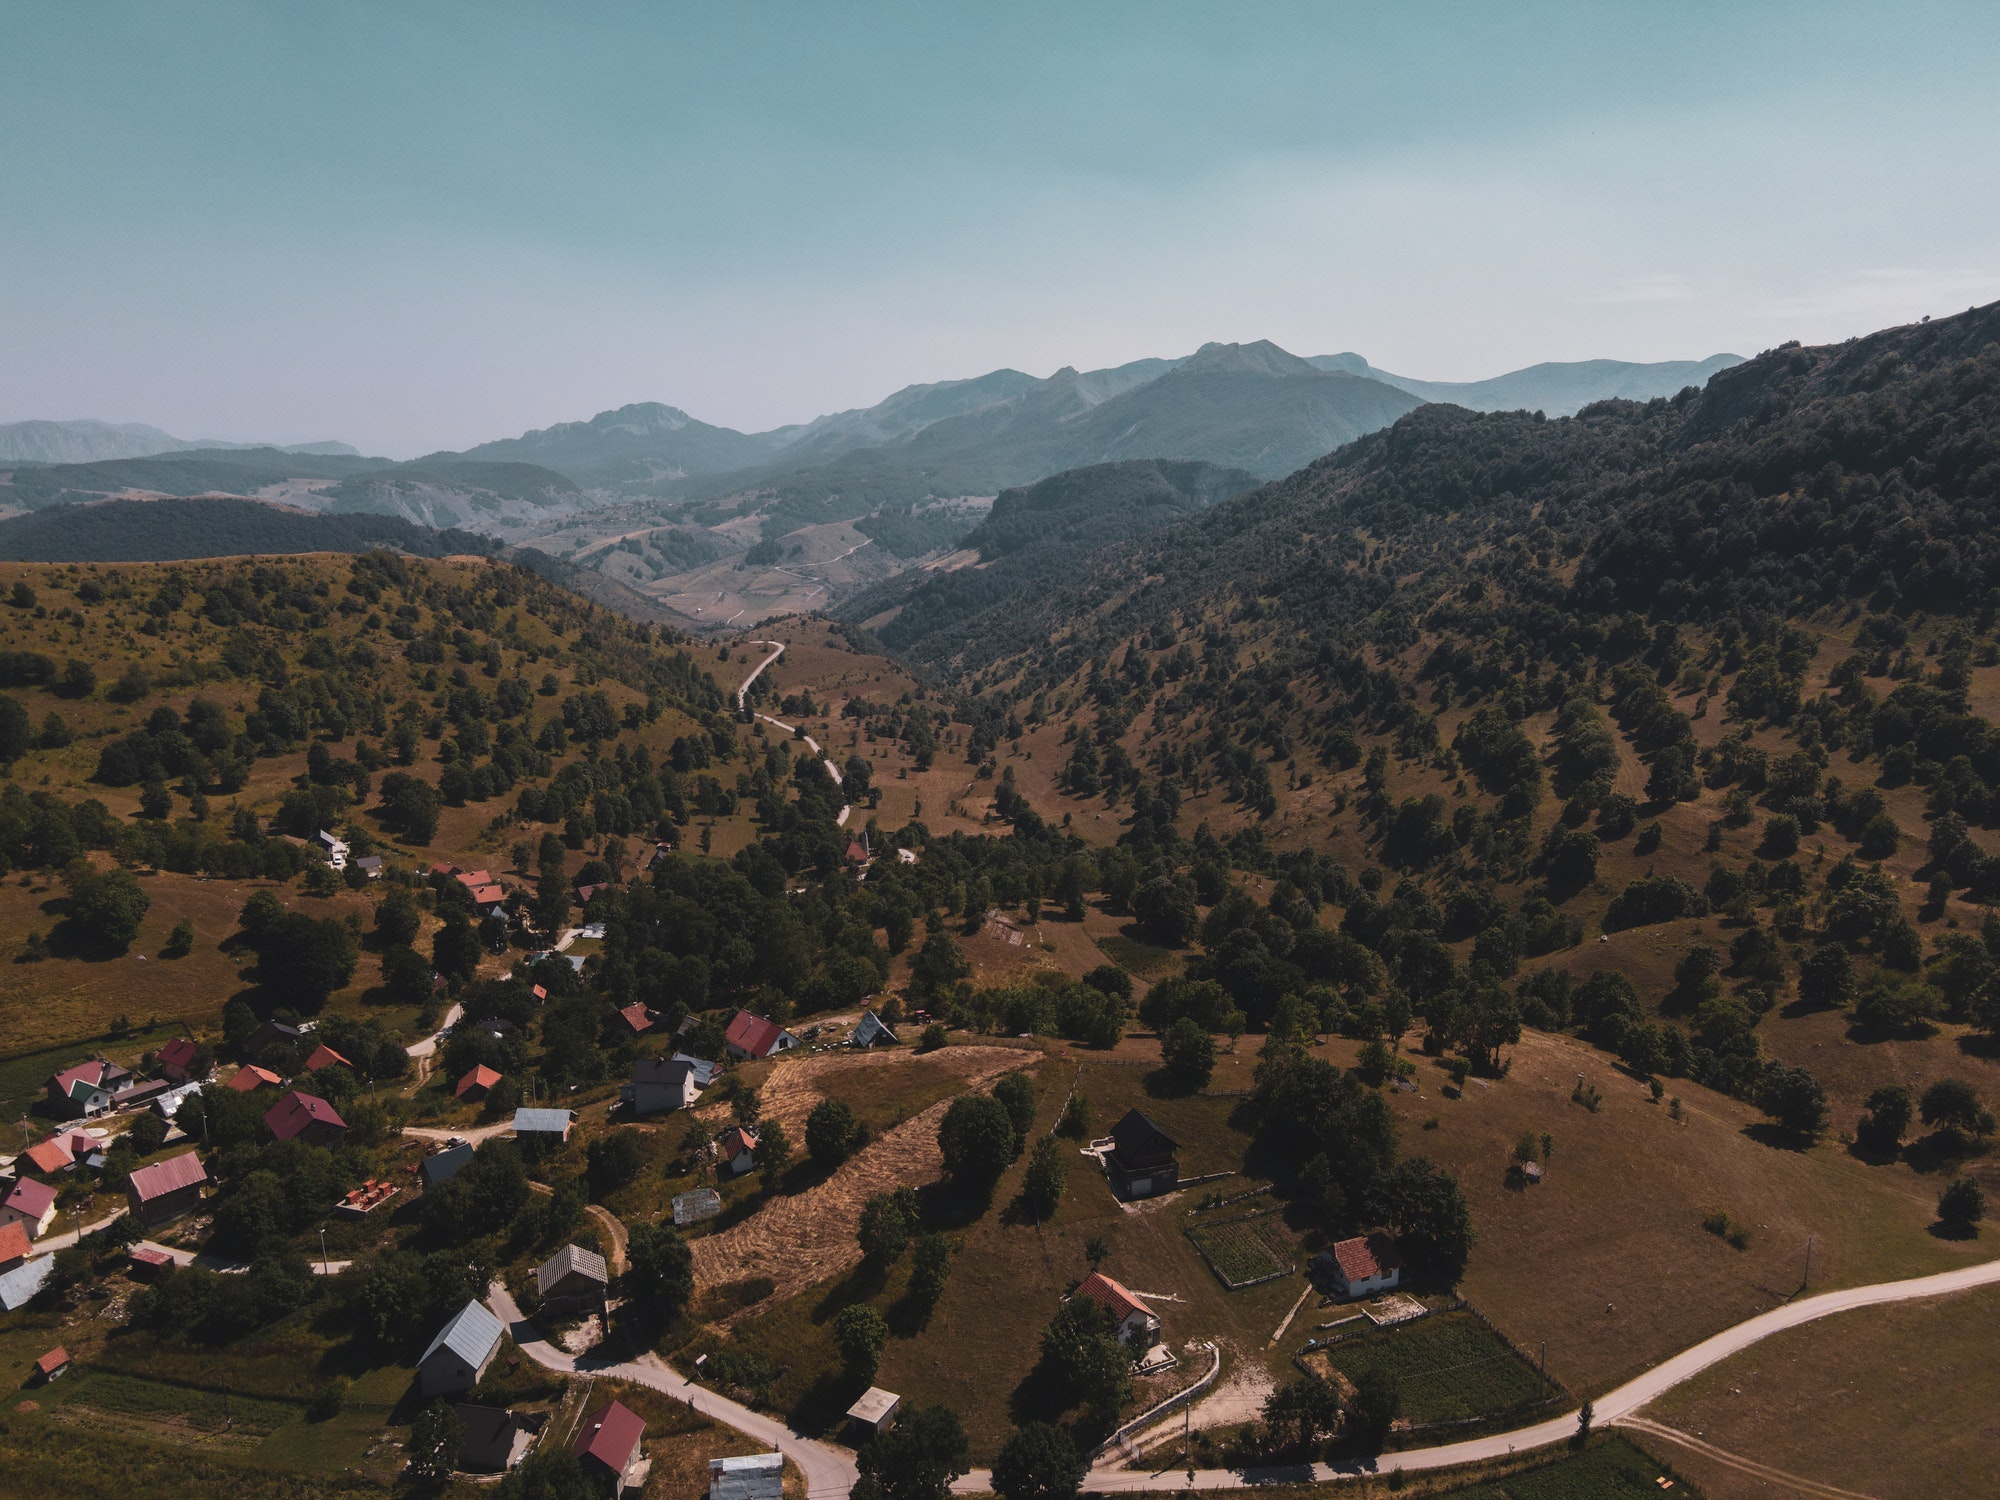 The village and the mountains